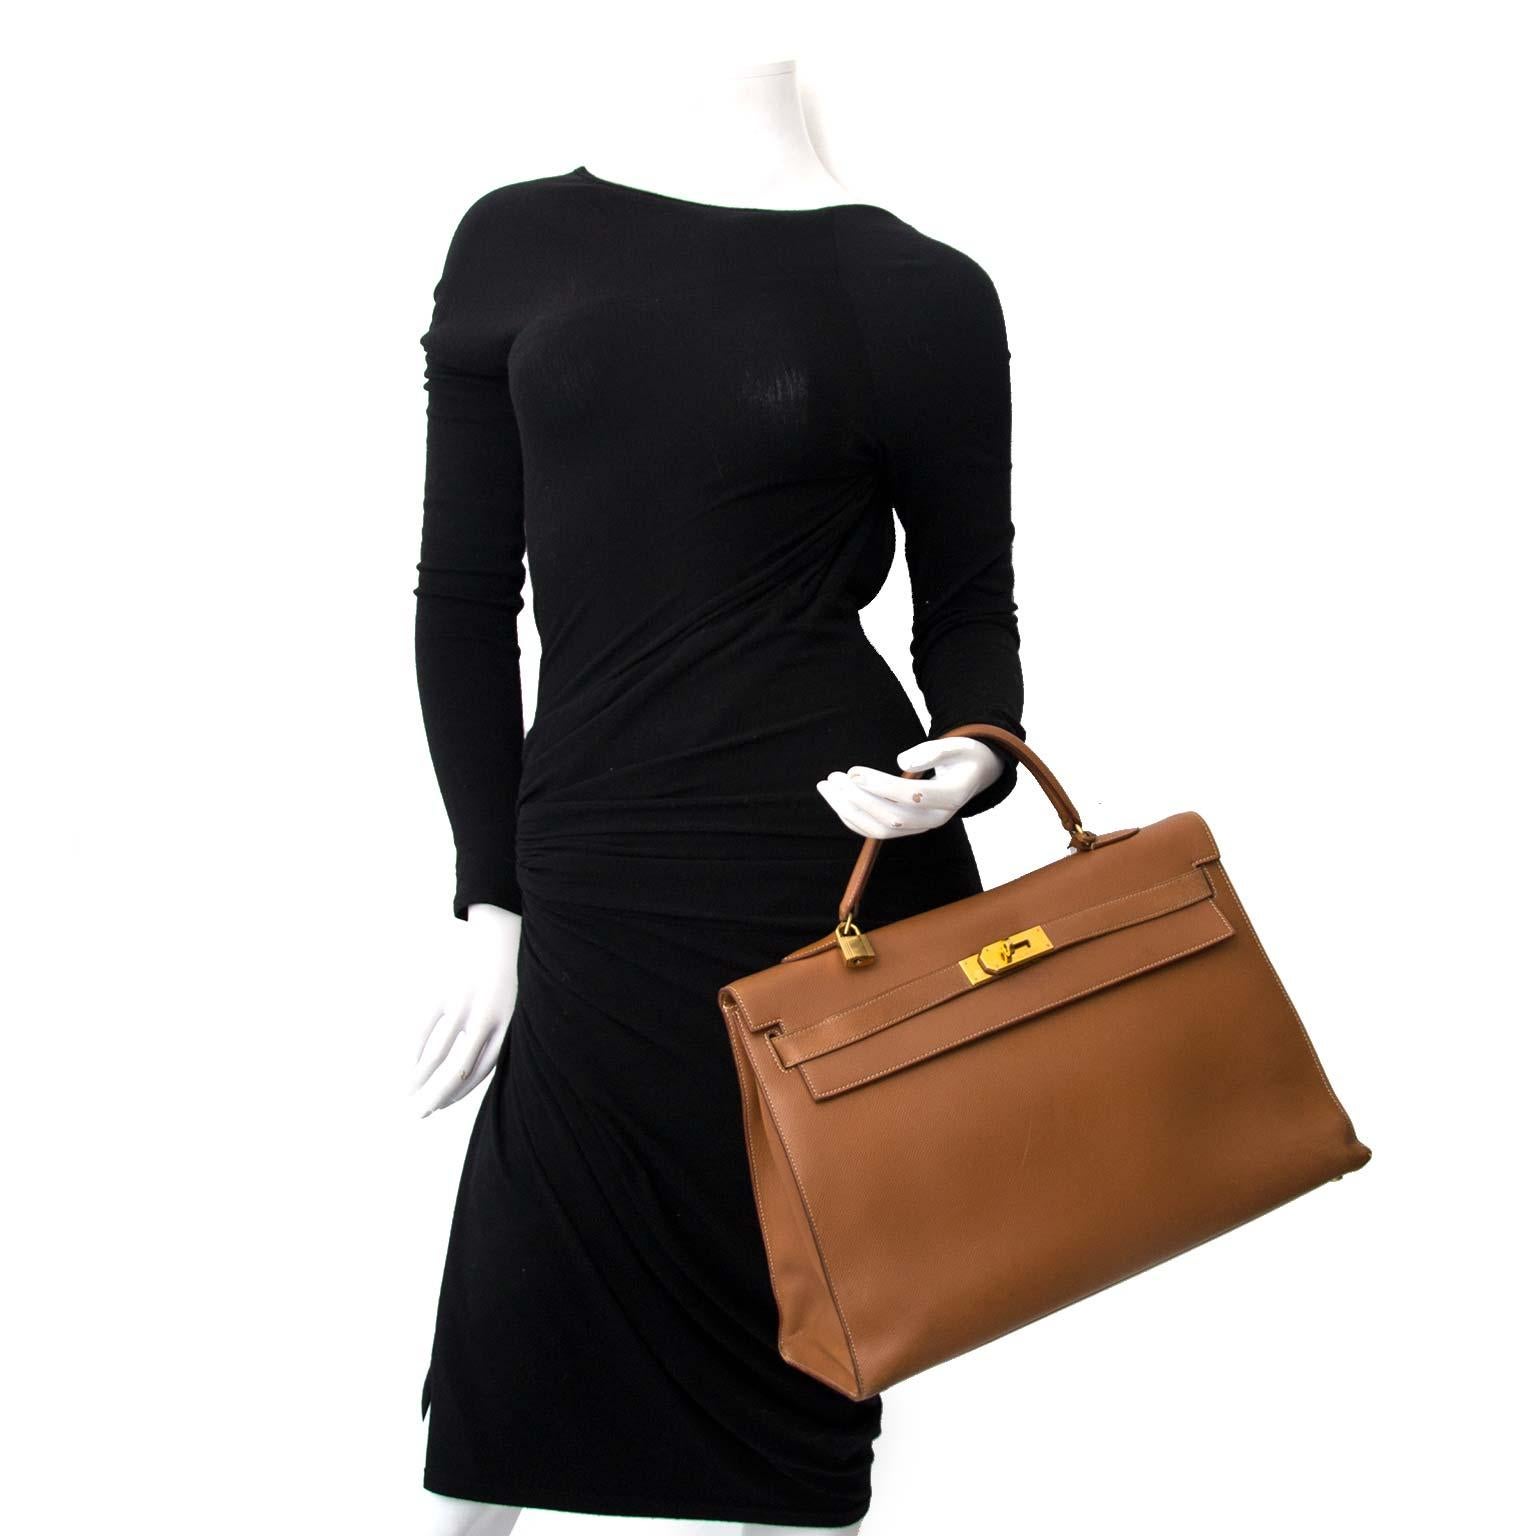 Hermes Kelly 40 Gold Sellier Courchevel GHW. This Kelly bag in a size 40 features gold hardware and is extremely hard to find.
This stylish bag is suitable for every occasion.